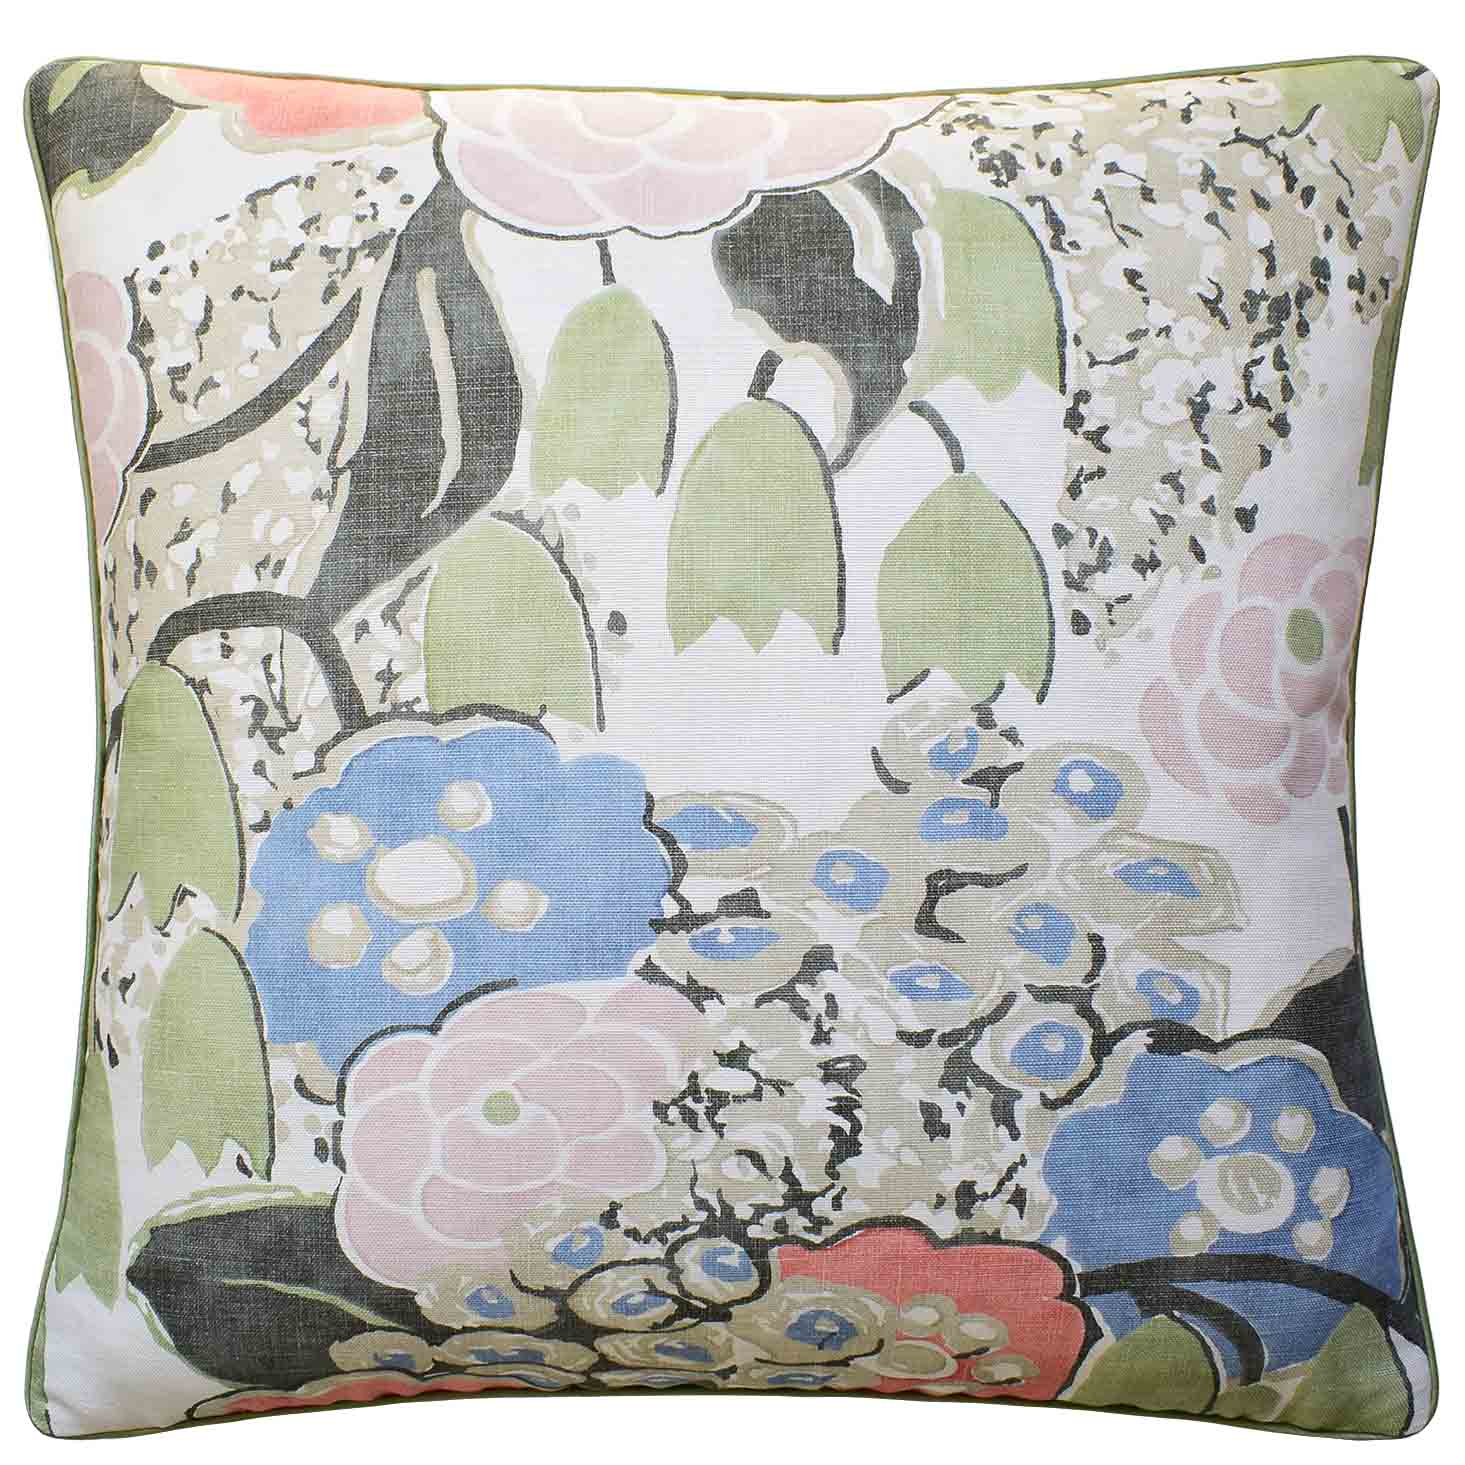 Mod Flowers Pillow Blush and Green-$325.00